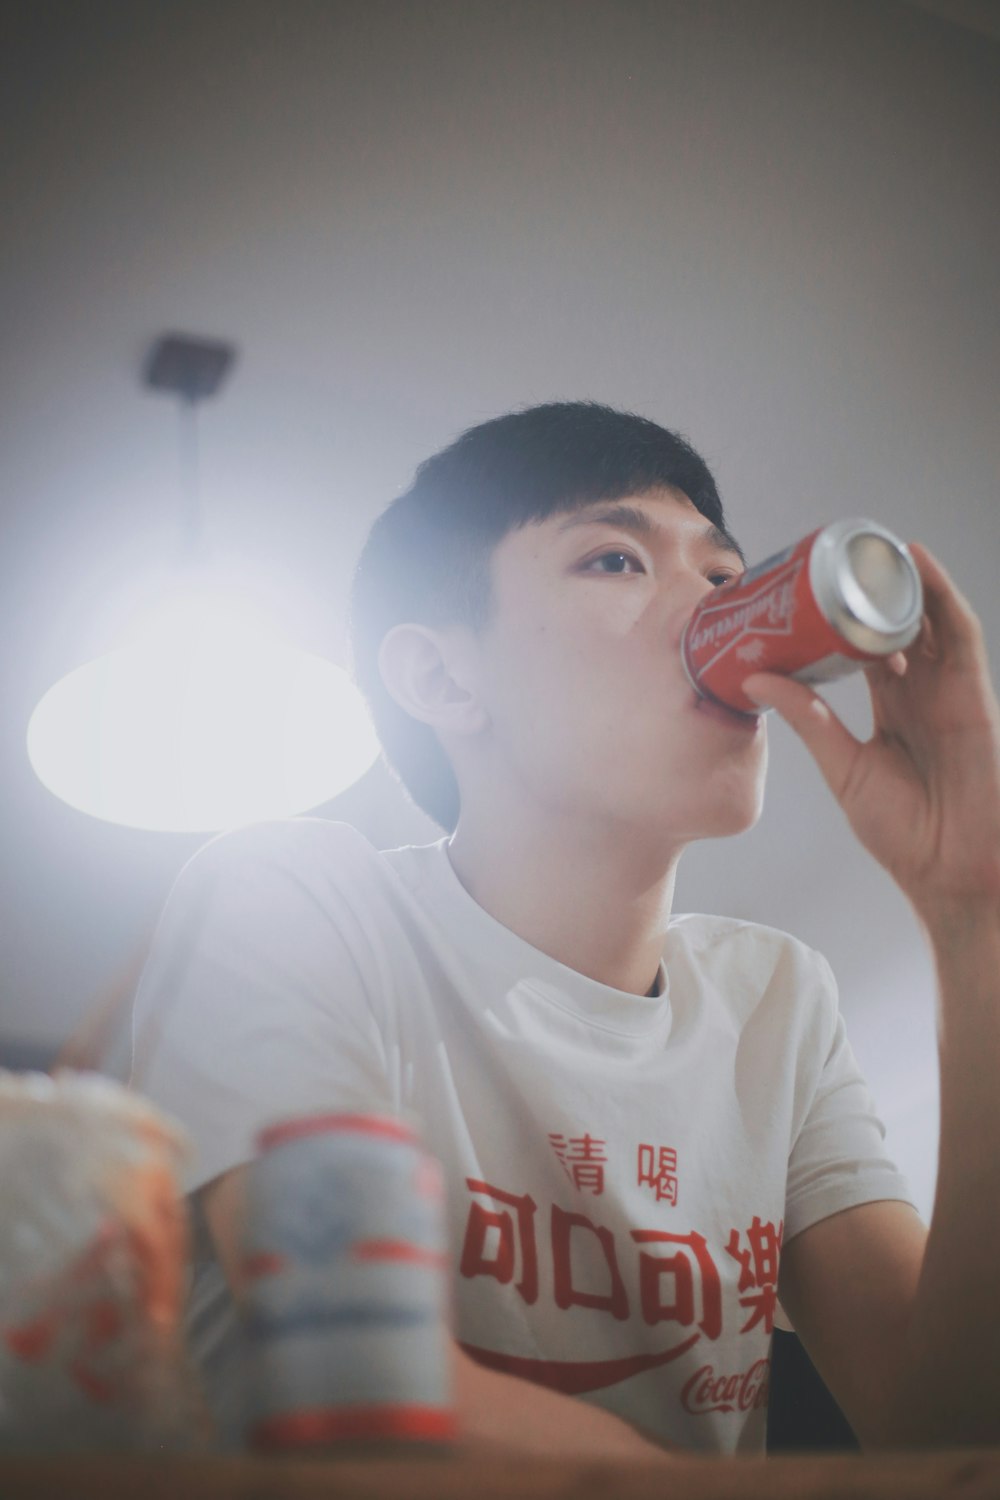 man in white top drinking canned soda